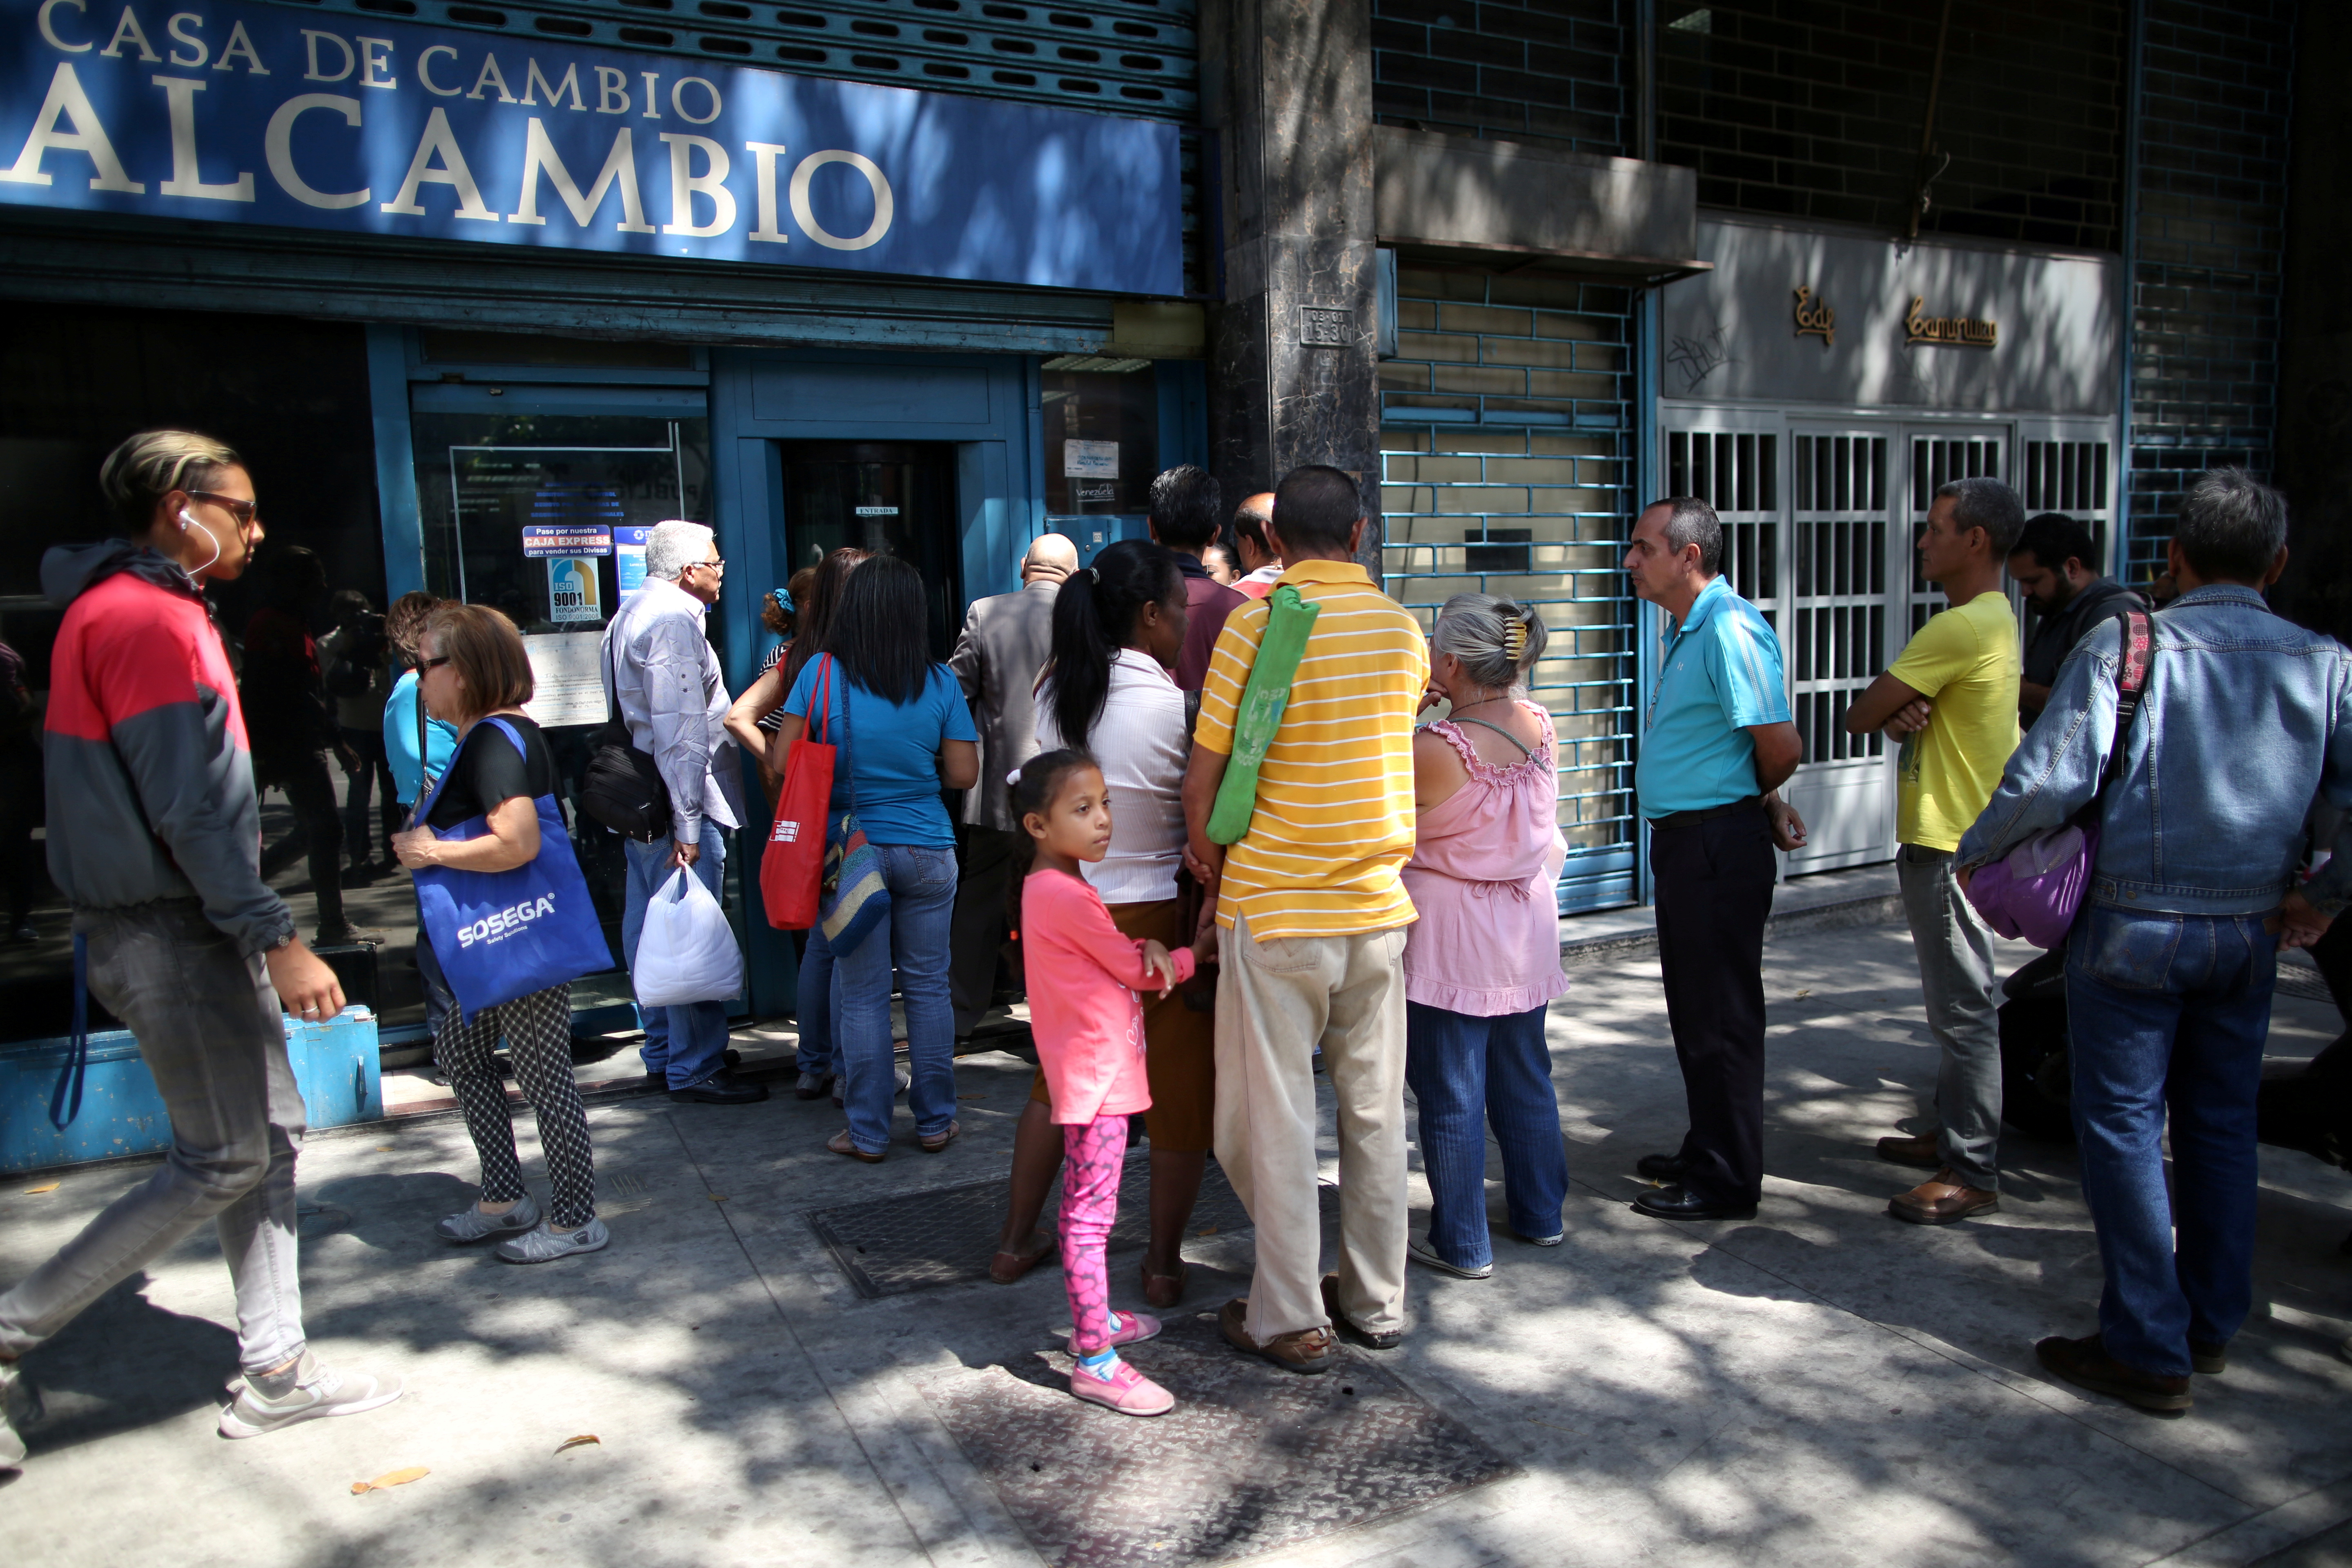 People wait in line outside of a currency exchange house in Caracas, Venezuela, February 5, 2019. REUTERS/Andres Martinez Casares/File Photo